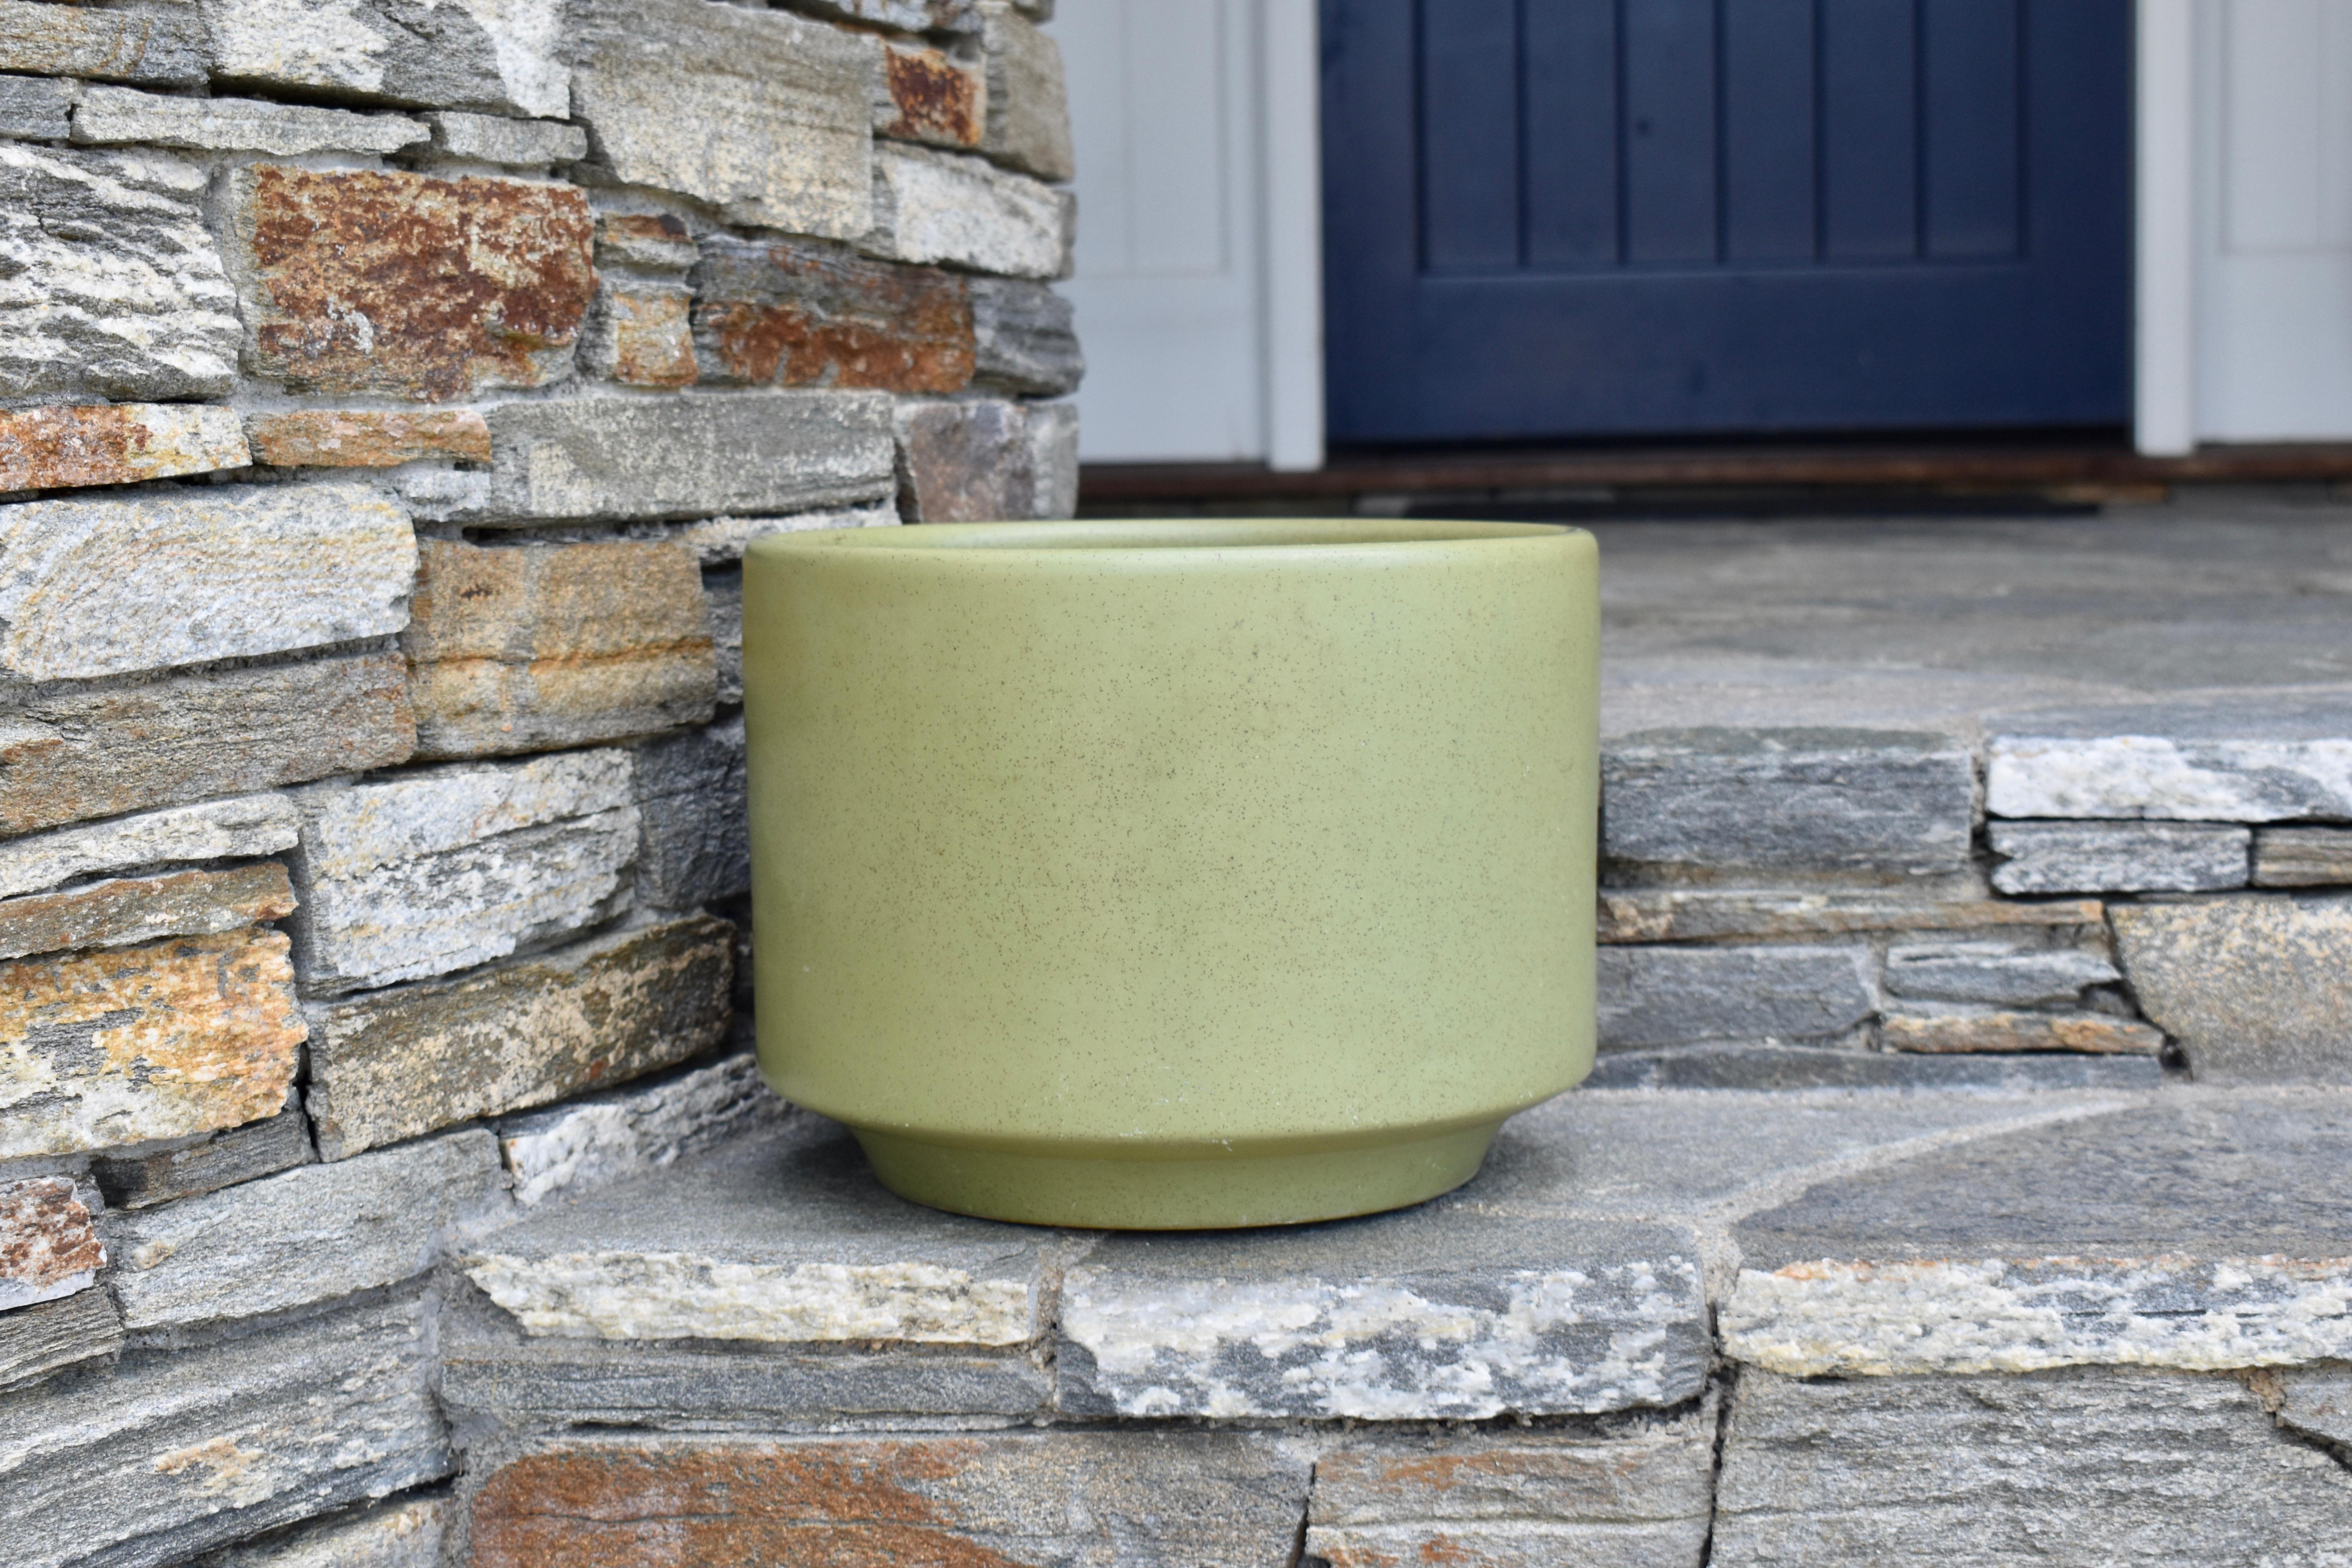 A smooth and matte light olive green-colored speckled California Pottery planter pot with USA marking on underside. Attributing to Gainey Pottery. No drain hole. Interior dimension is 10.63